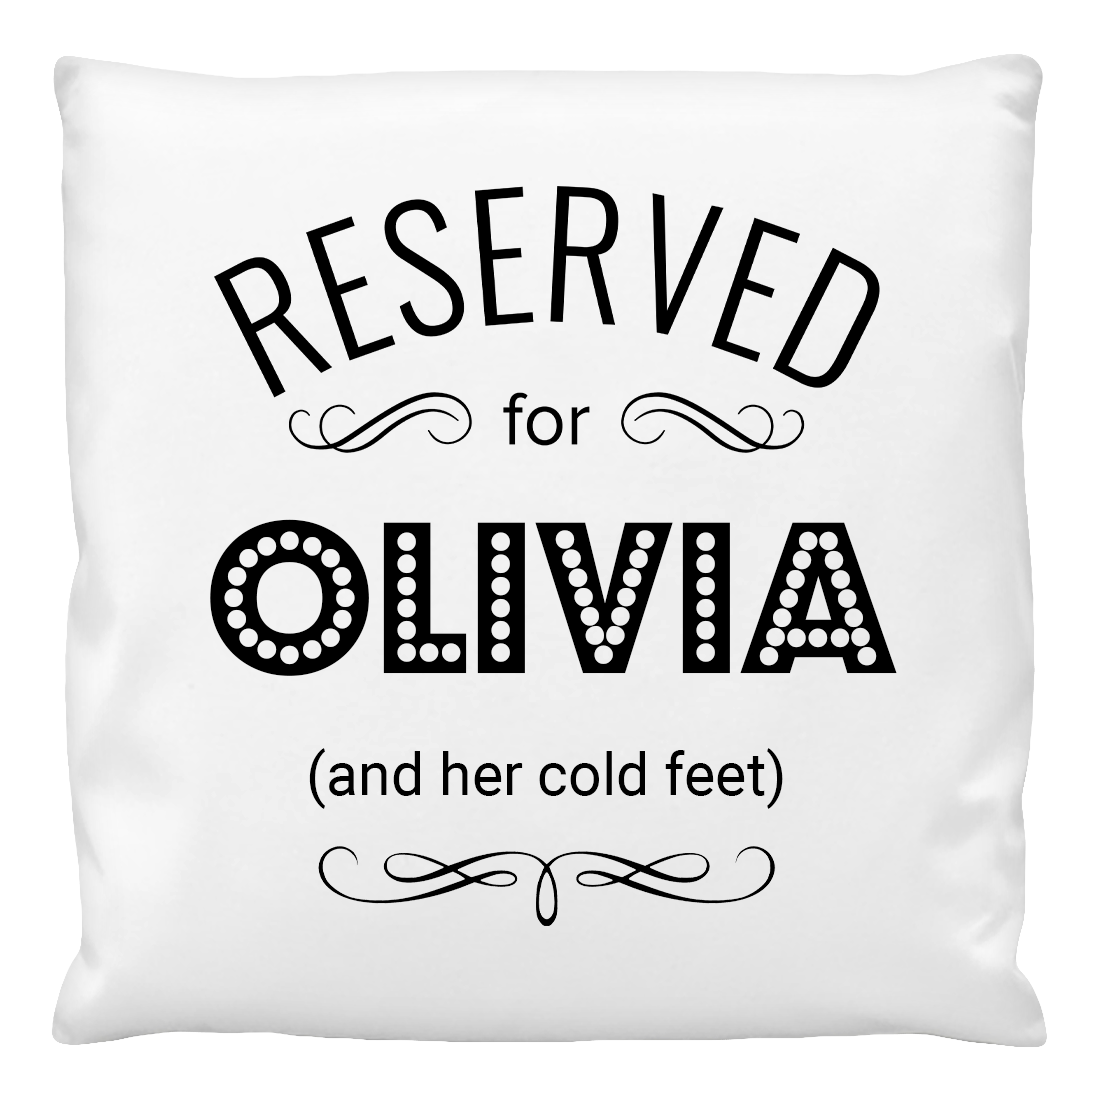 Cushion Cover - Reserved